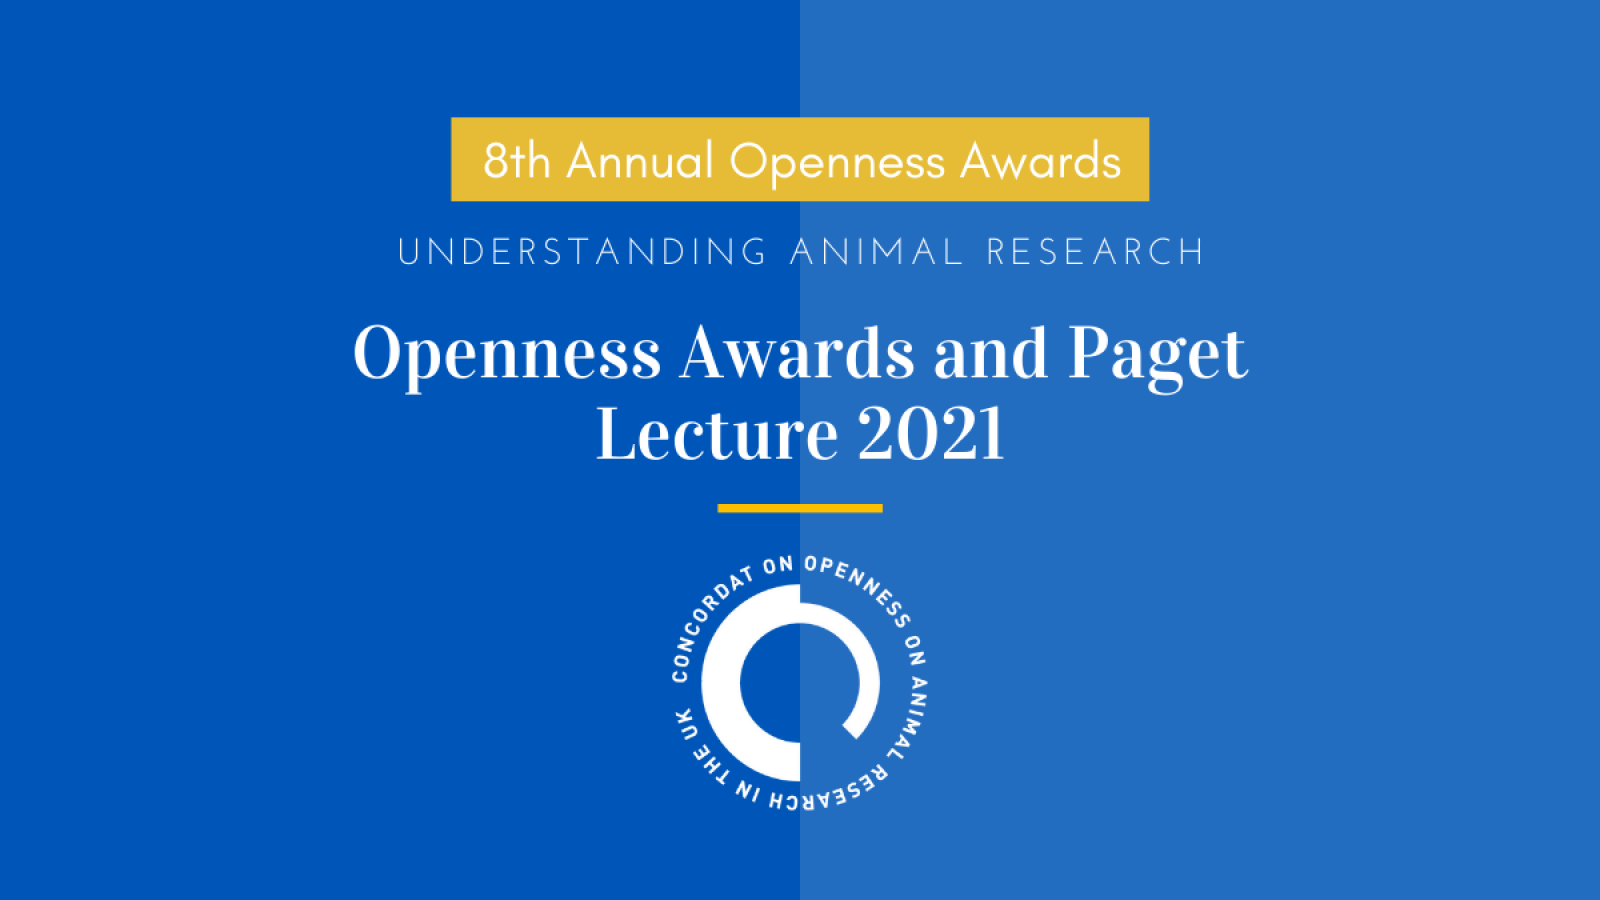 Openness Awards and Paget Lecture 2021